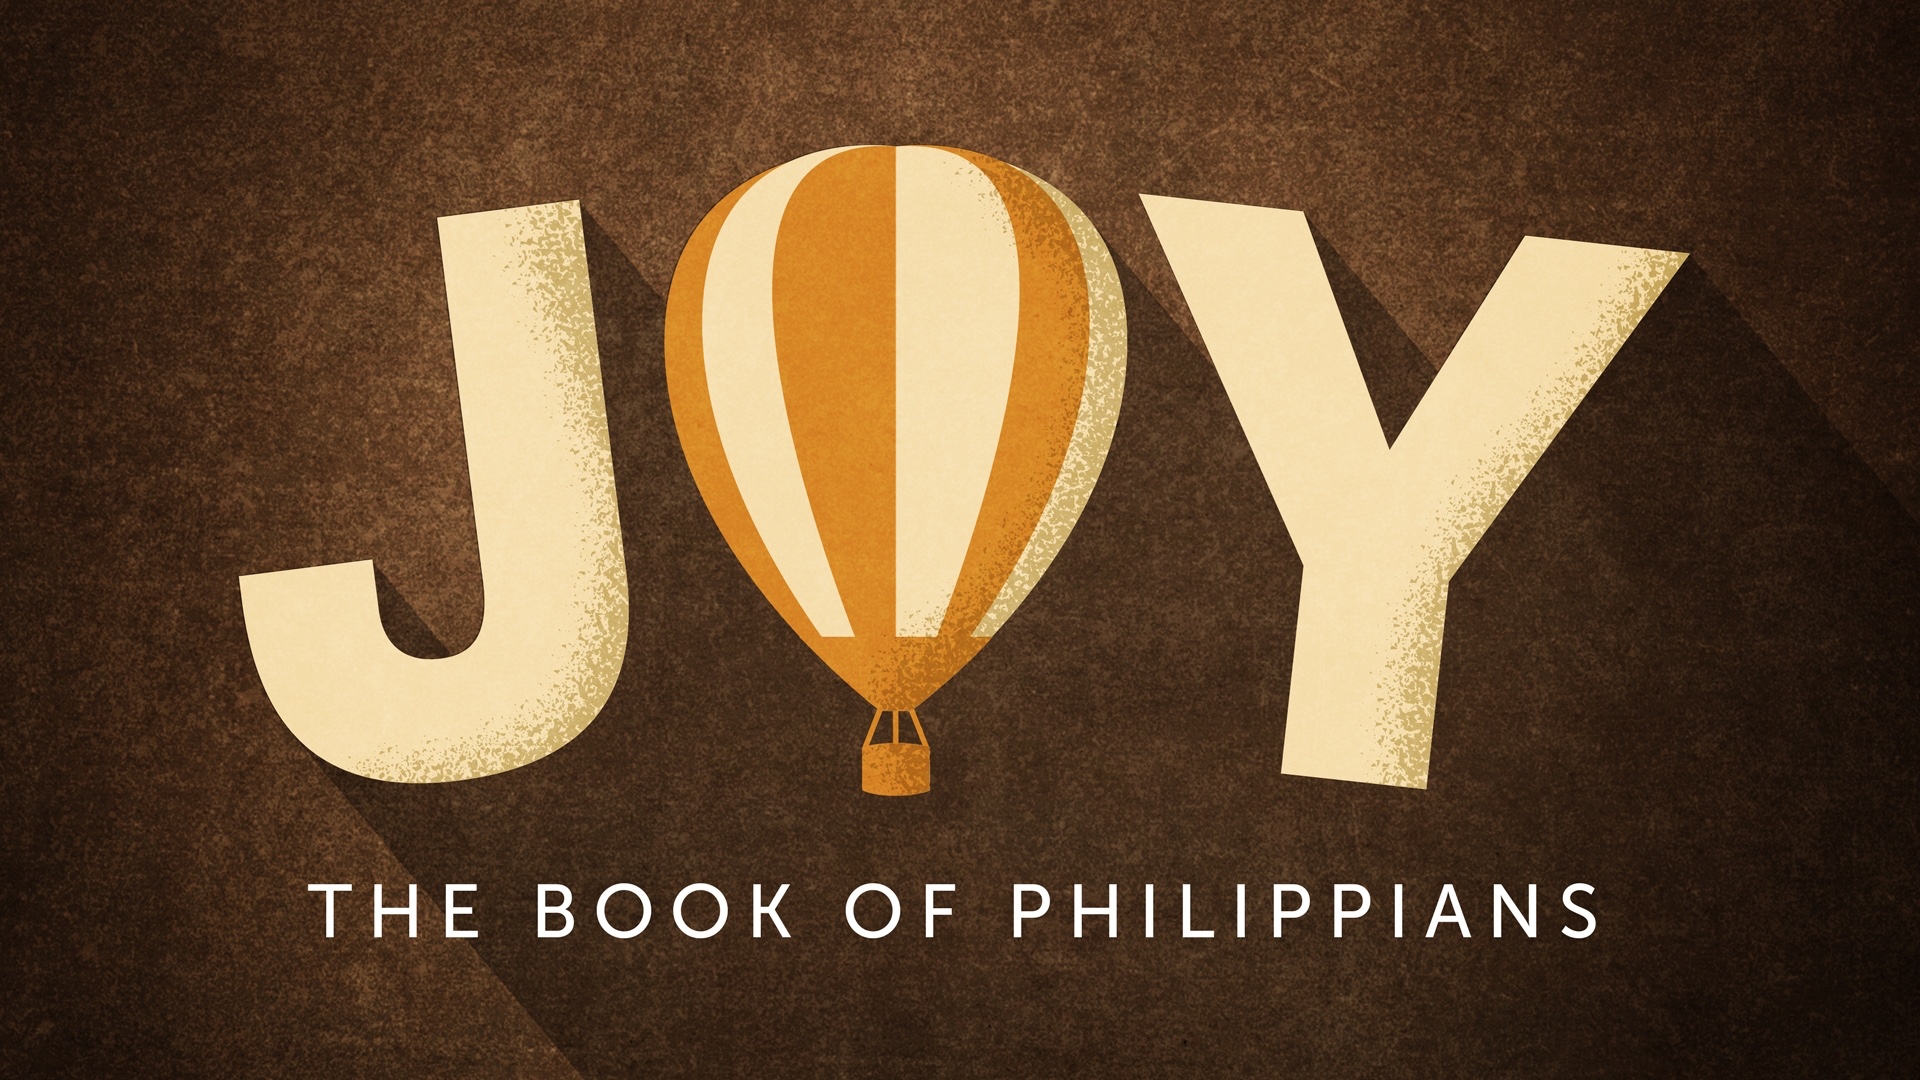 Joy: The Book of Philippians - Finding Joy in Christ-centred Community